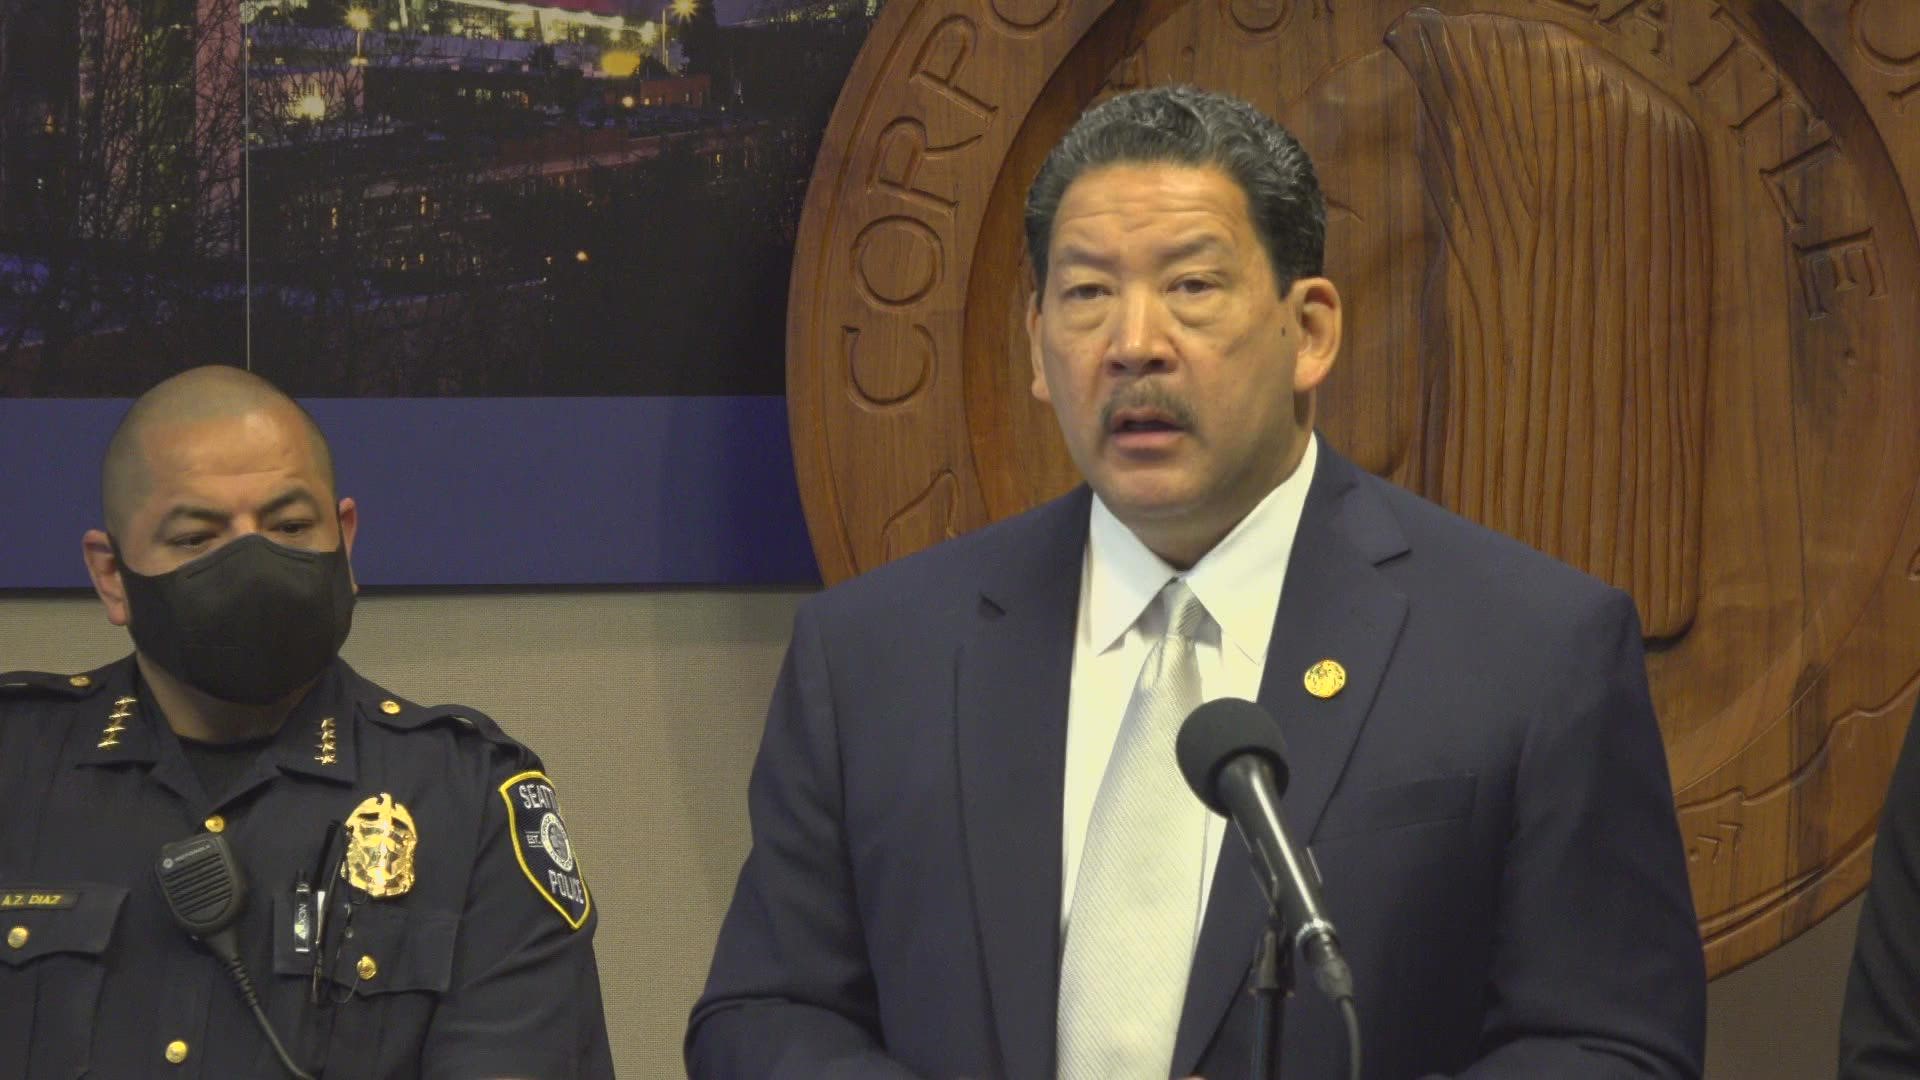 Mayor Bruce Harrell made public safety one of the key topics of his campaign in 2021.